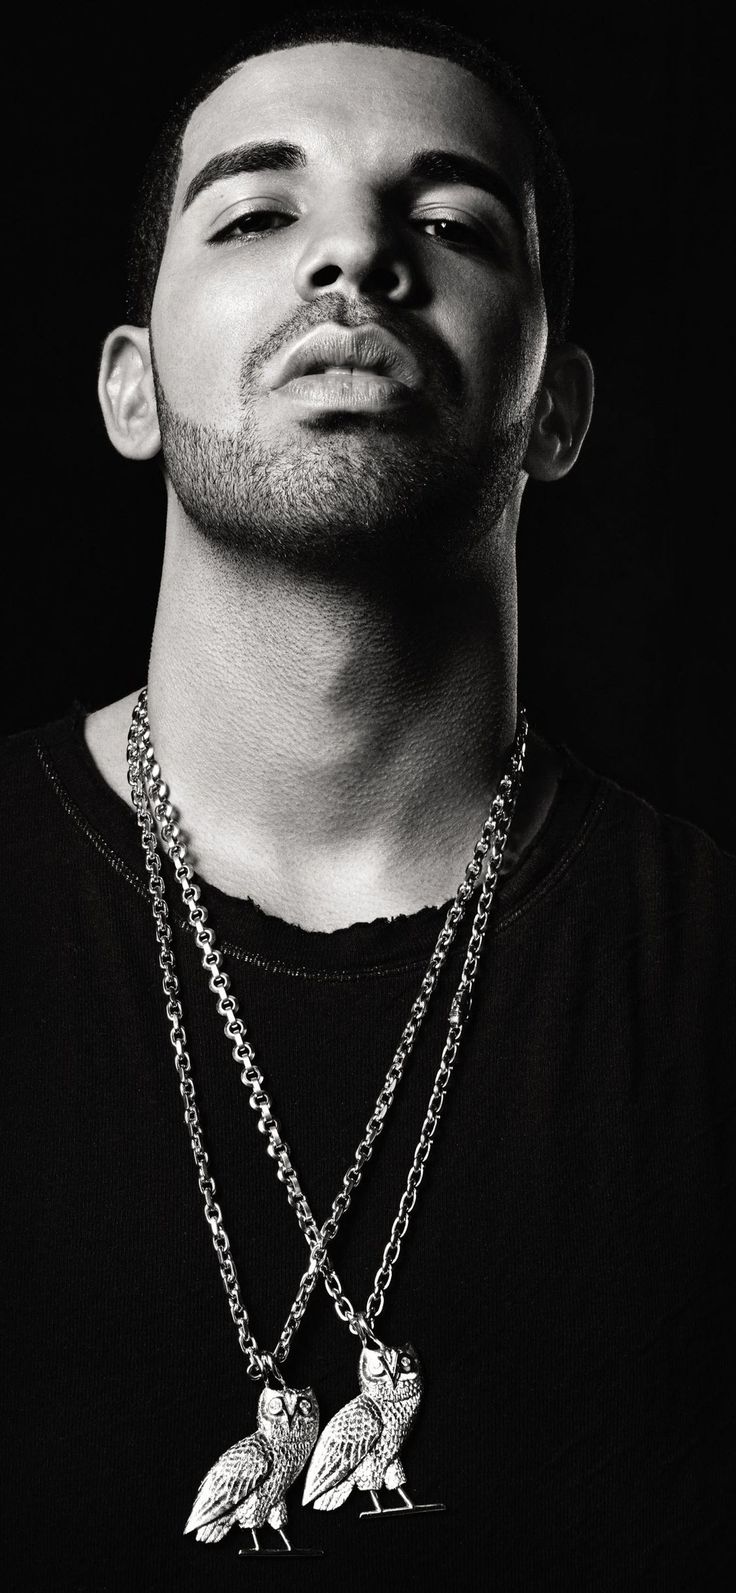 Drake wallpaper for mobile phone tablet desktop puter and other devices hd and k wallpapers drake wallpapers aubrey drake drake